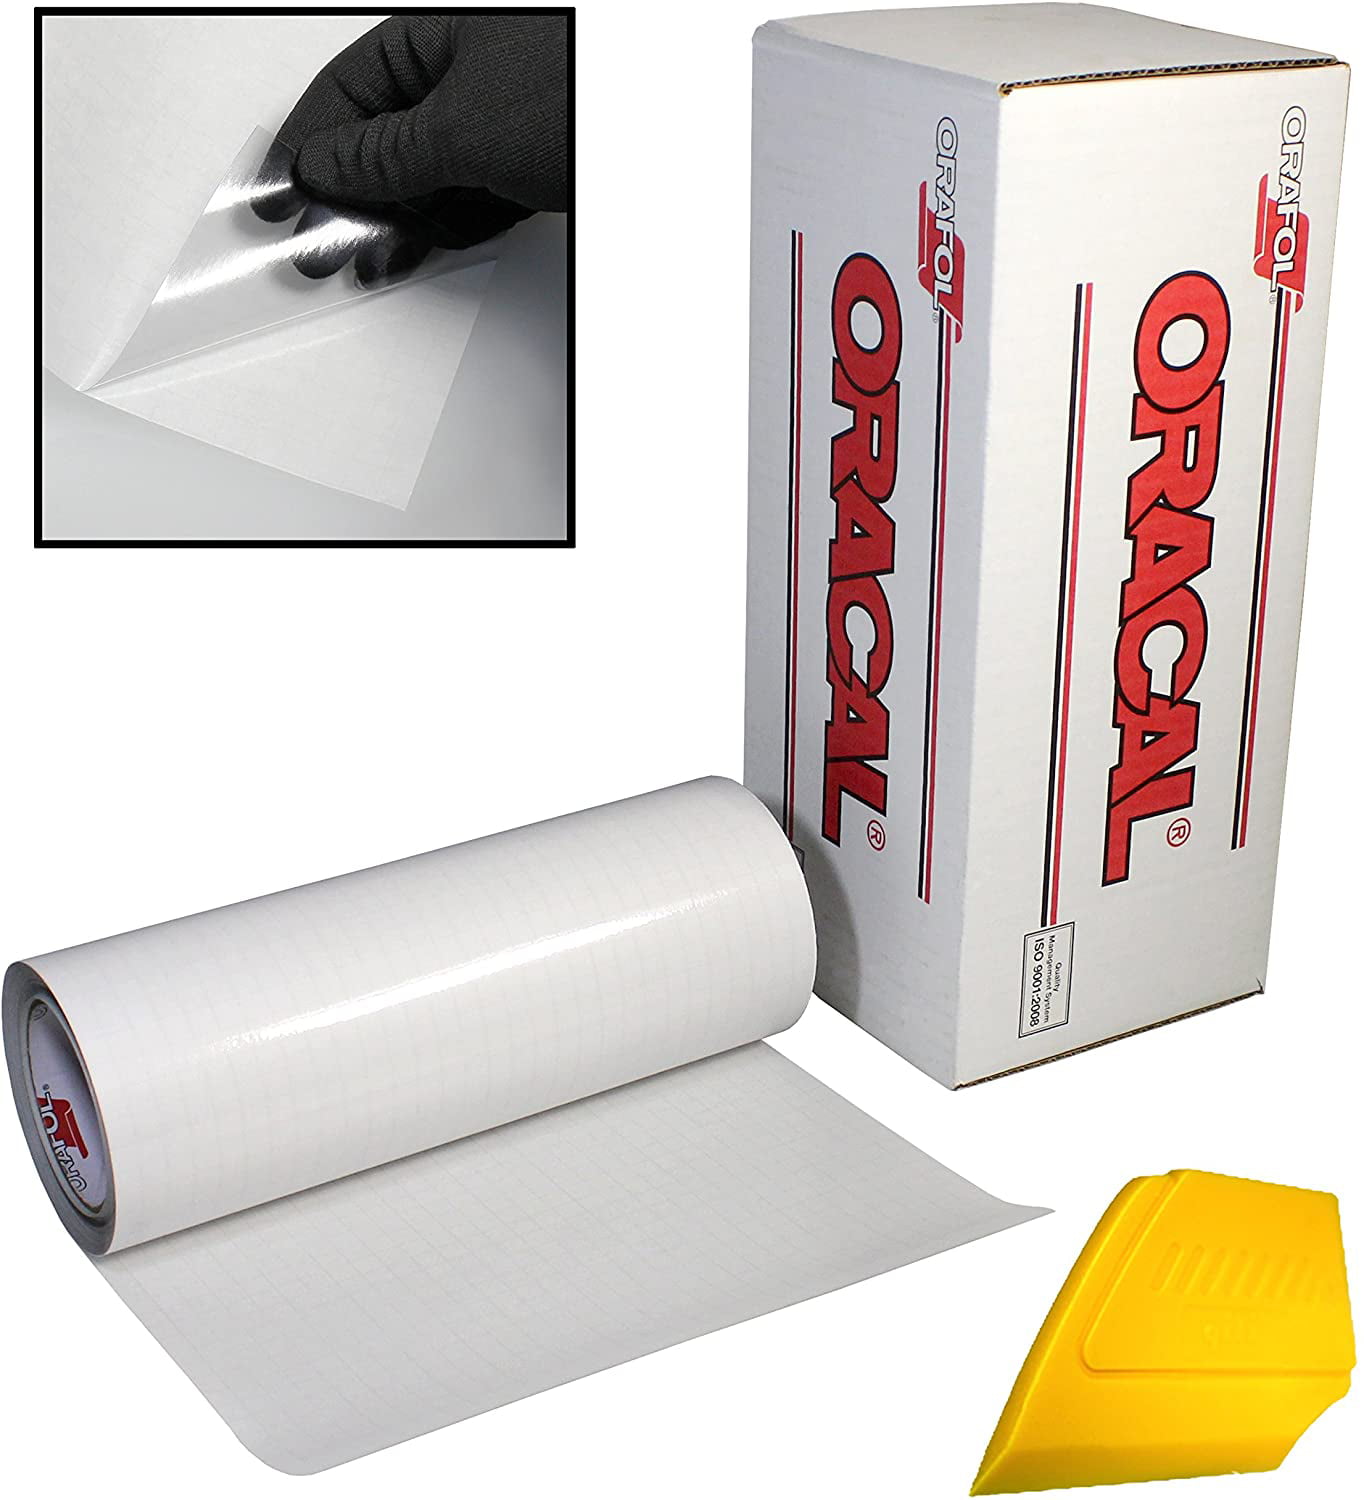 ORACAL 651 High Gloss Craft Adhesive Vinyl 15ft x 1ft Roll w/ Free 12 x 24 Roll of Transfer Paper and Hard Yellow Detailer Squeegee Gold Metallic 